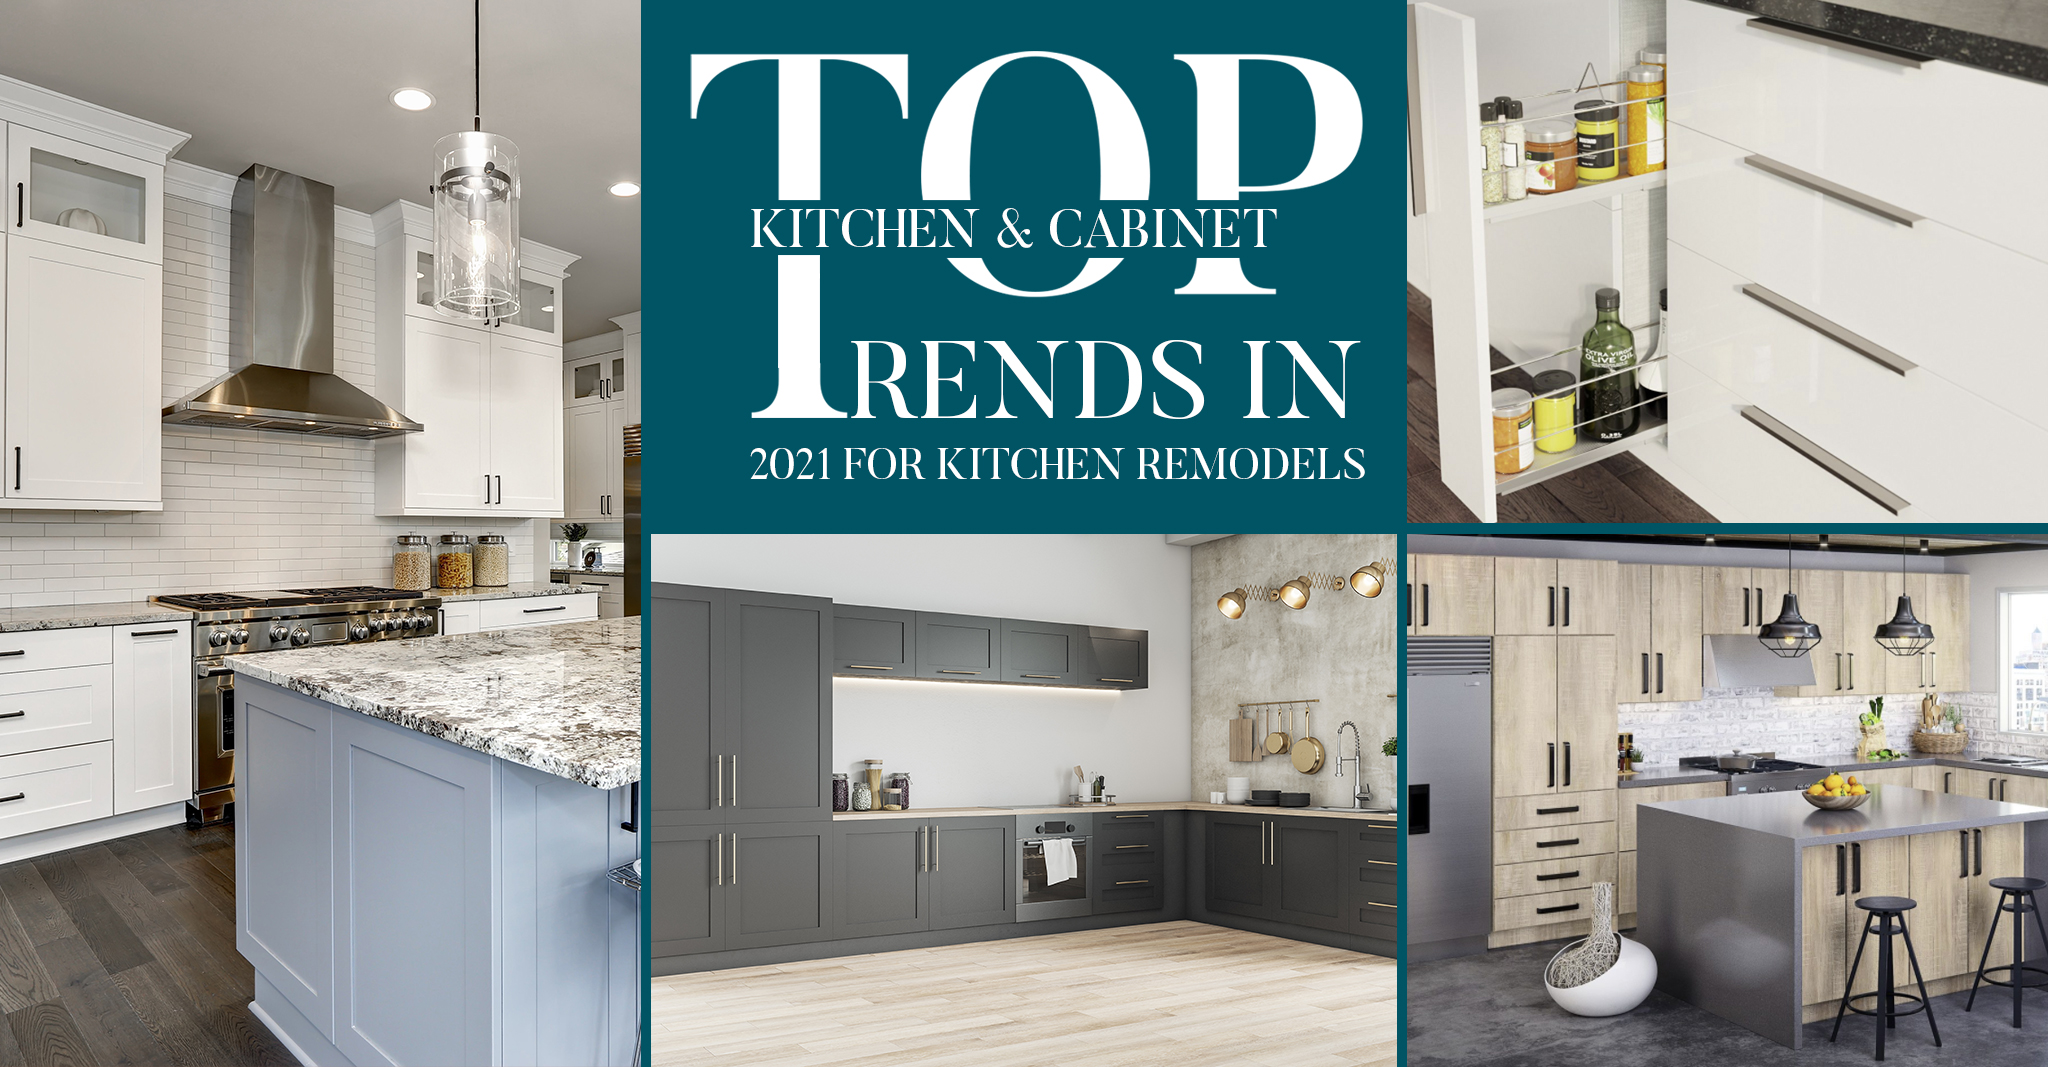 Top Kitchen and Cabinet Trends in 2021 for Kitchen Remodels